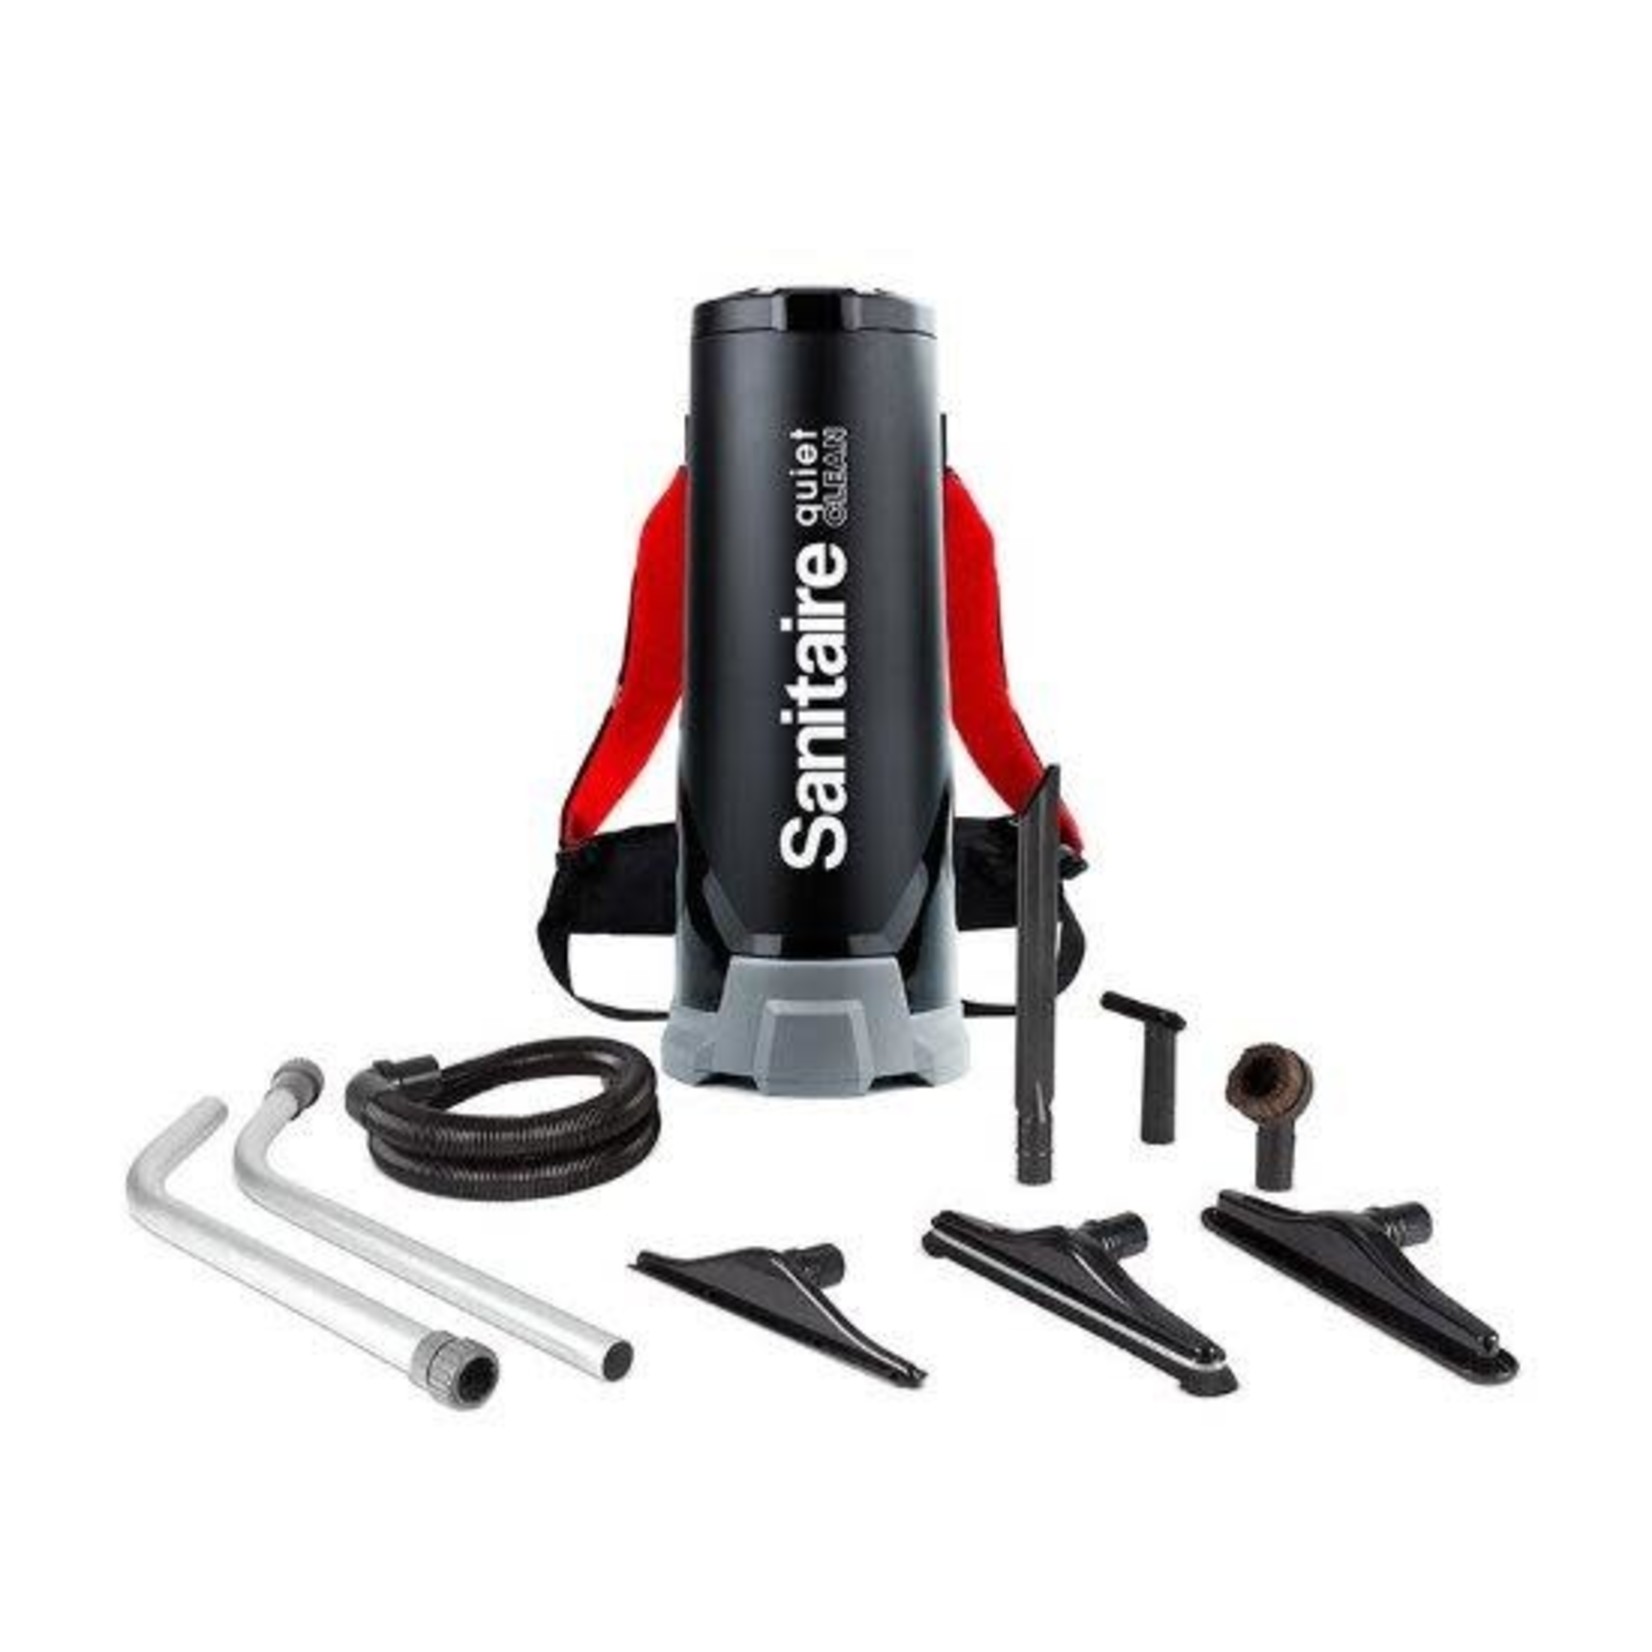 Sanitaire Sanitaire Commercial Backpack Transport Vacuum